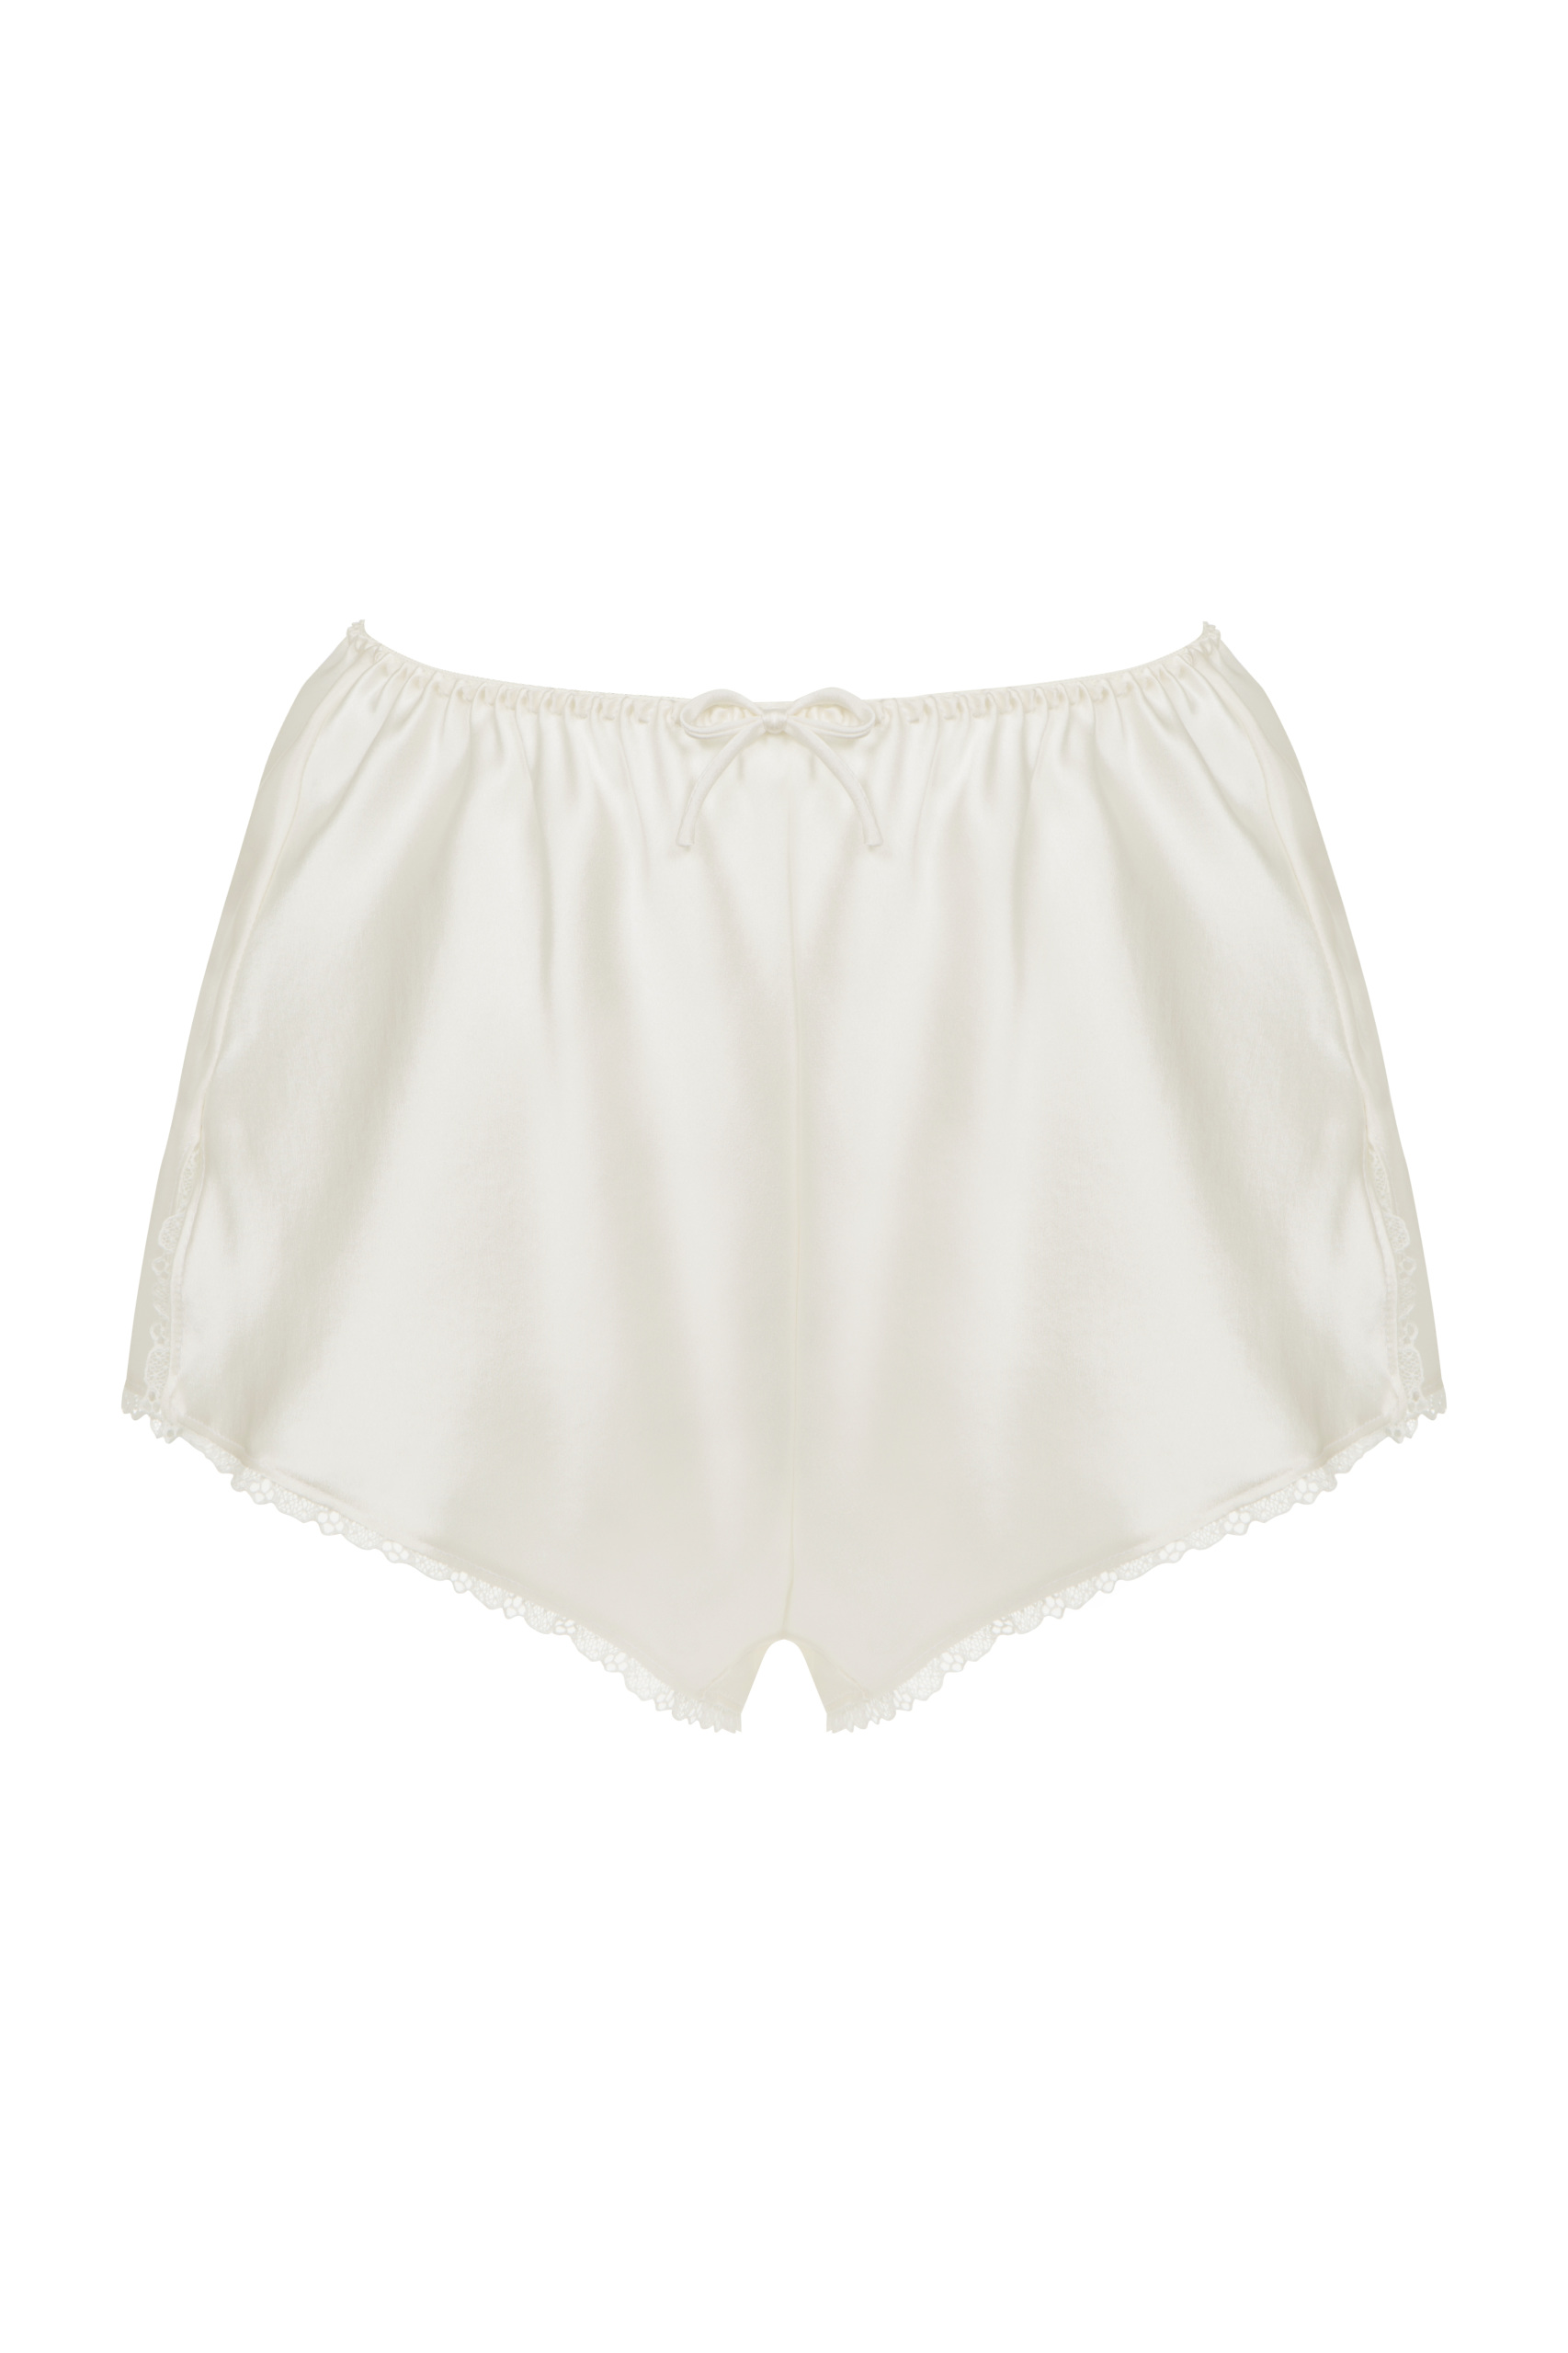 Ivory Silk French Knickers. Handcrafted by Keturah Brown Lingerie